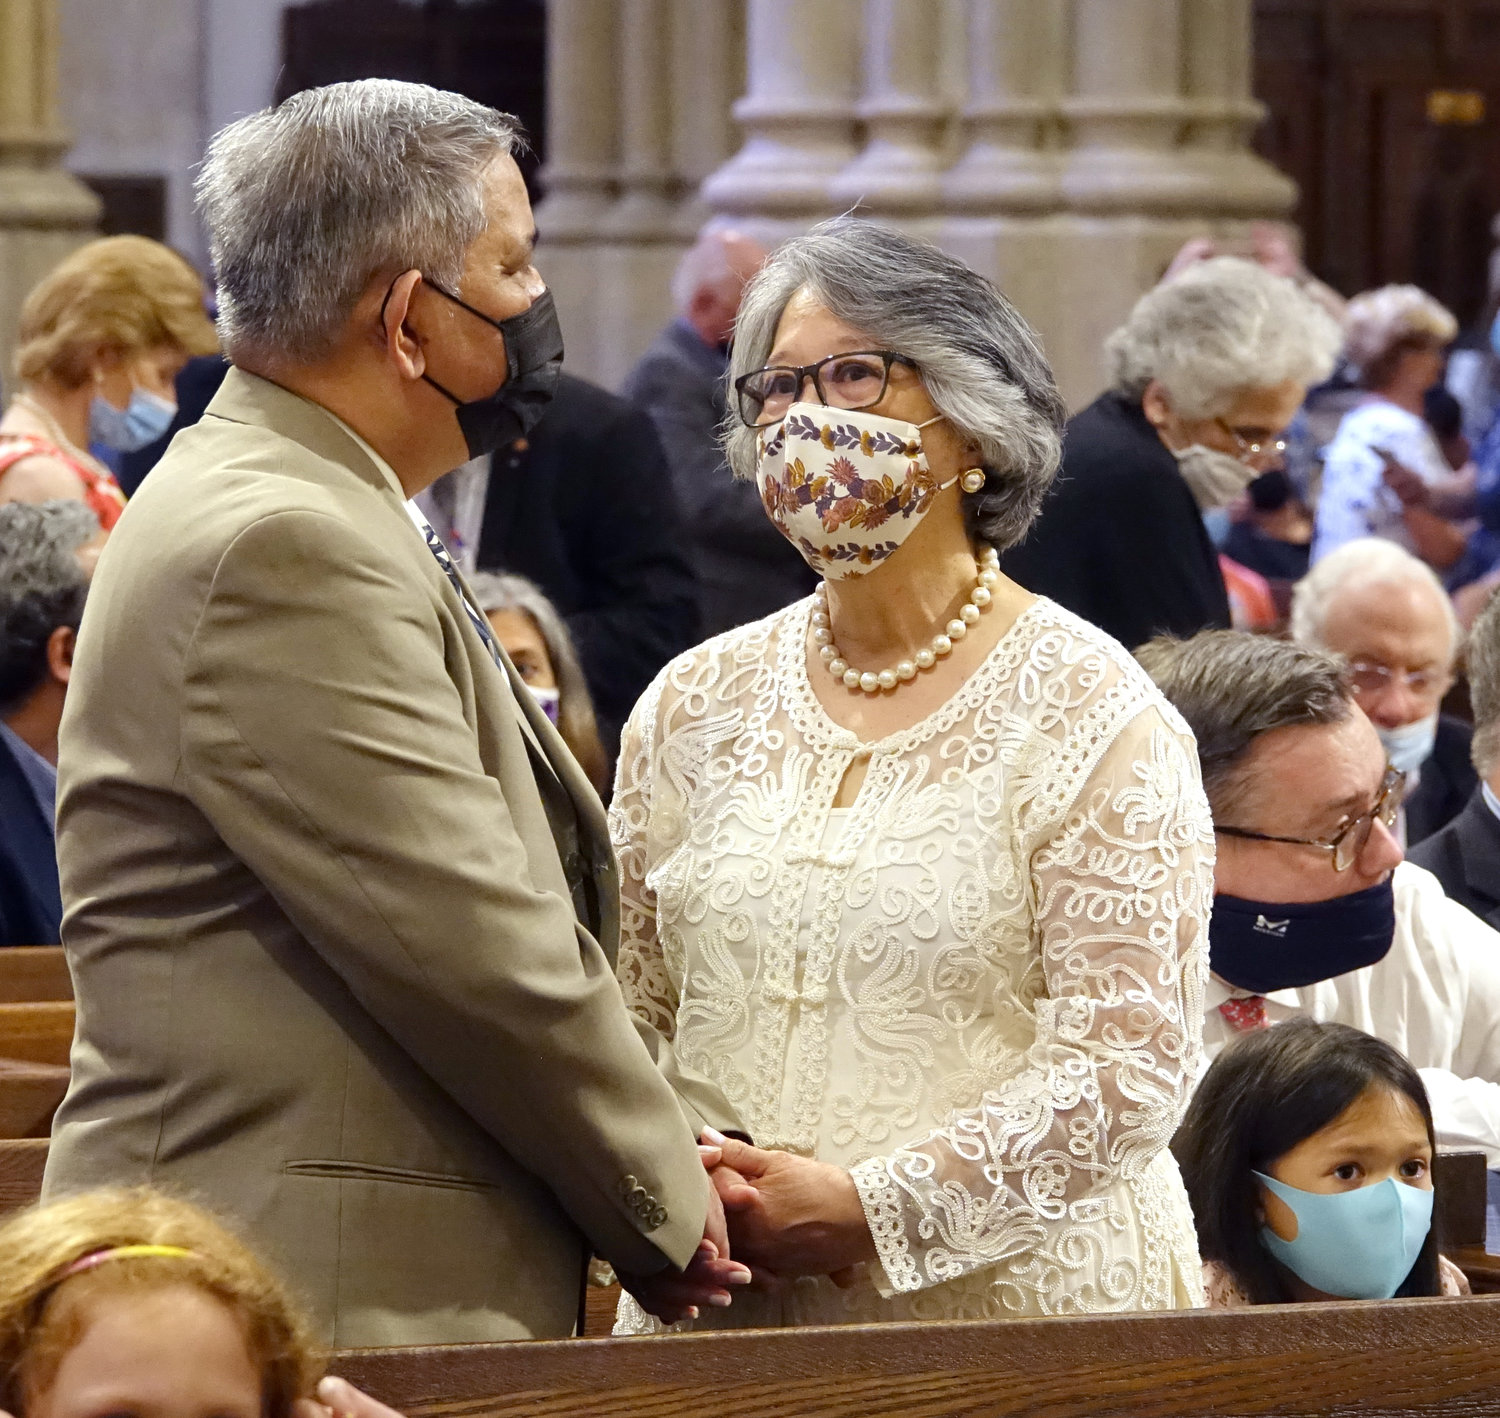 Married couples recite their vows at the Golden Jubilee Mass celebrated by Cardinal Dolan at St. Patrick’s Cathedral June 6. A total of 144 couples celebrating their 50th wedding anniversary in 2021 participated.